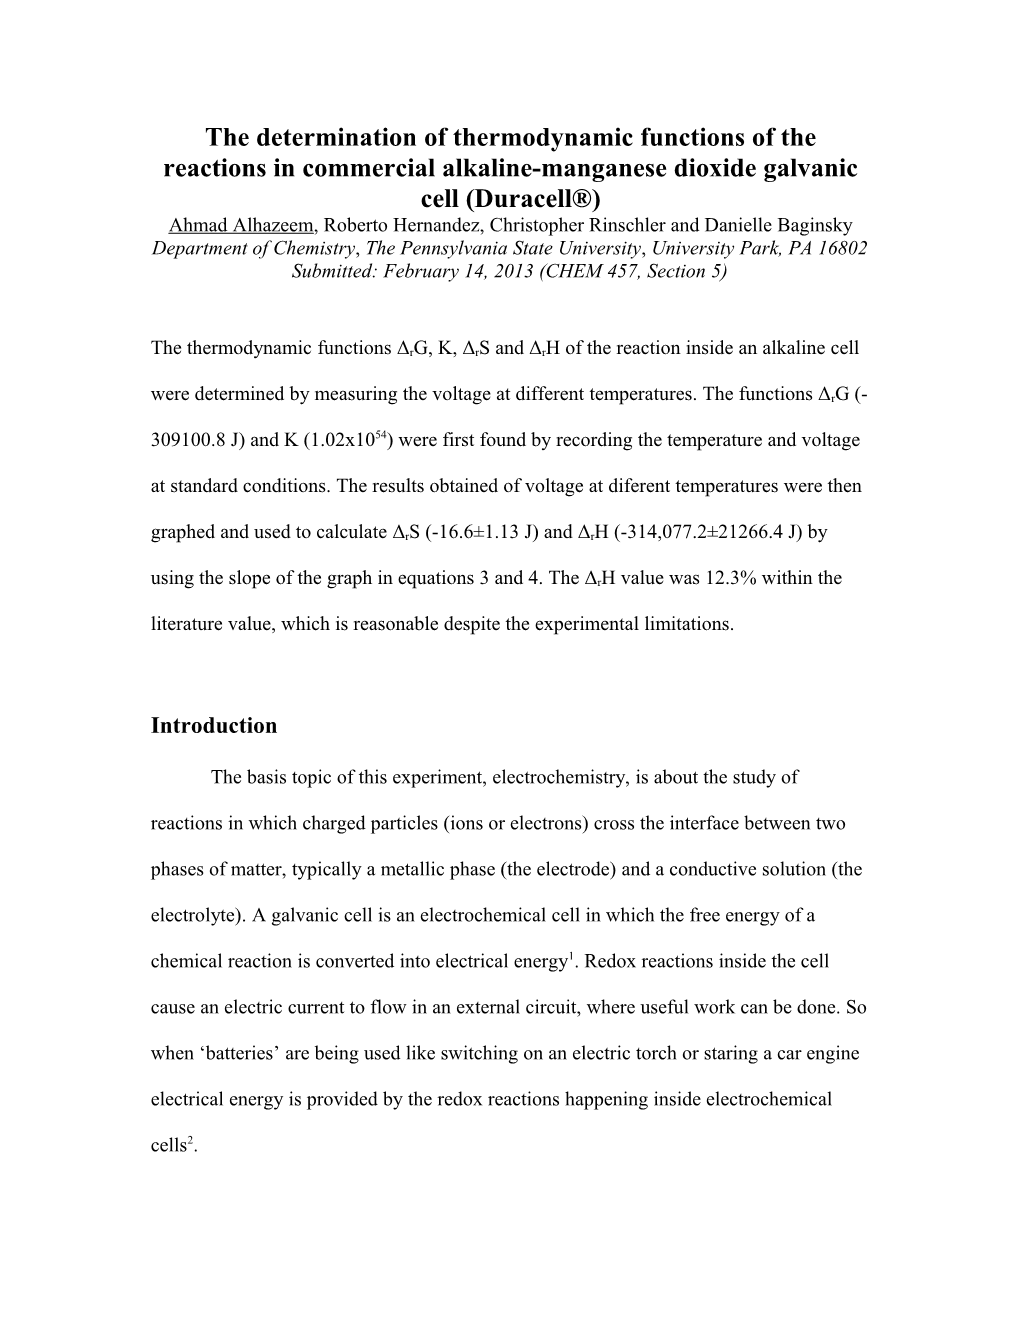 The Determination of Thermodynamic Functions of the Reactions in Commercial Alkaline-Manganese